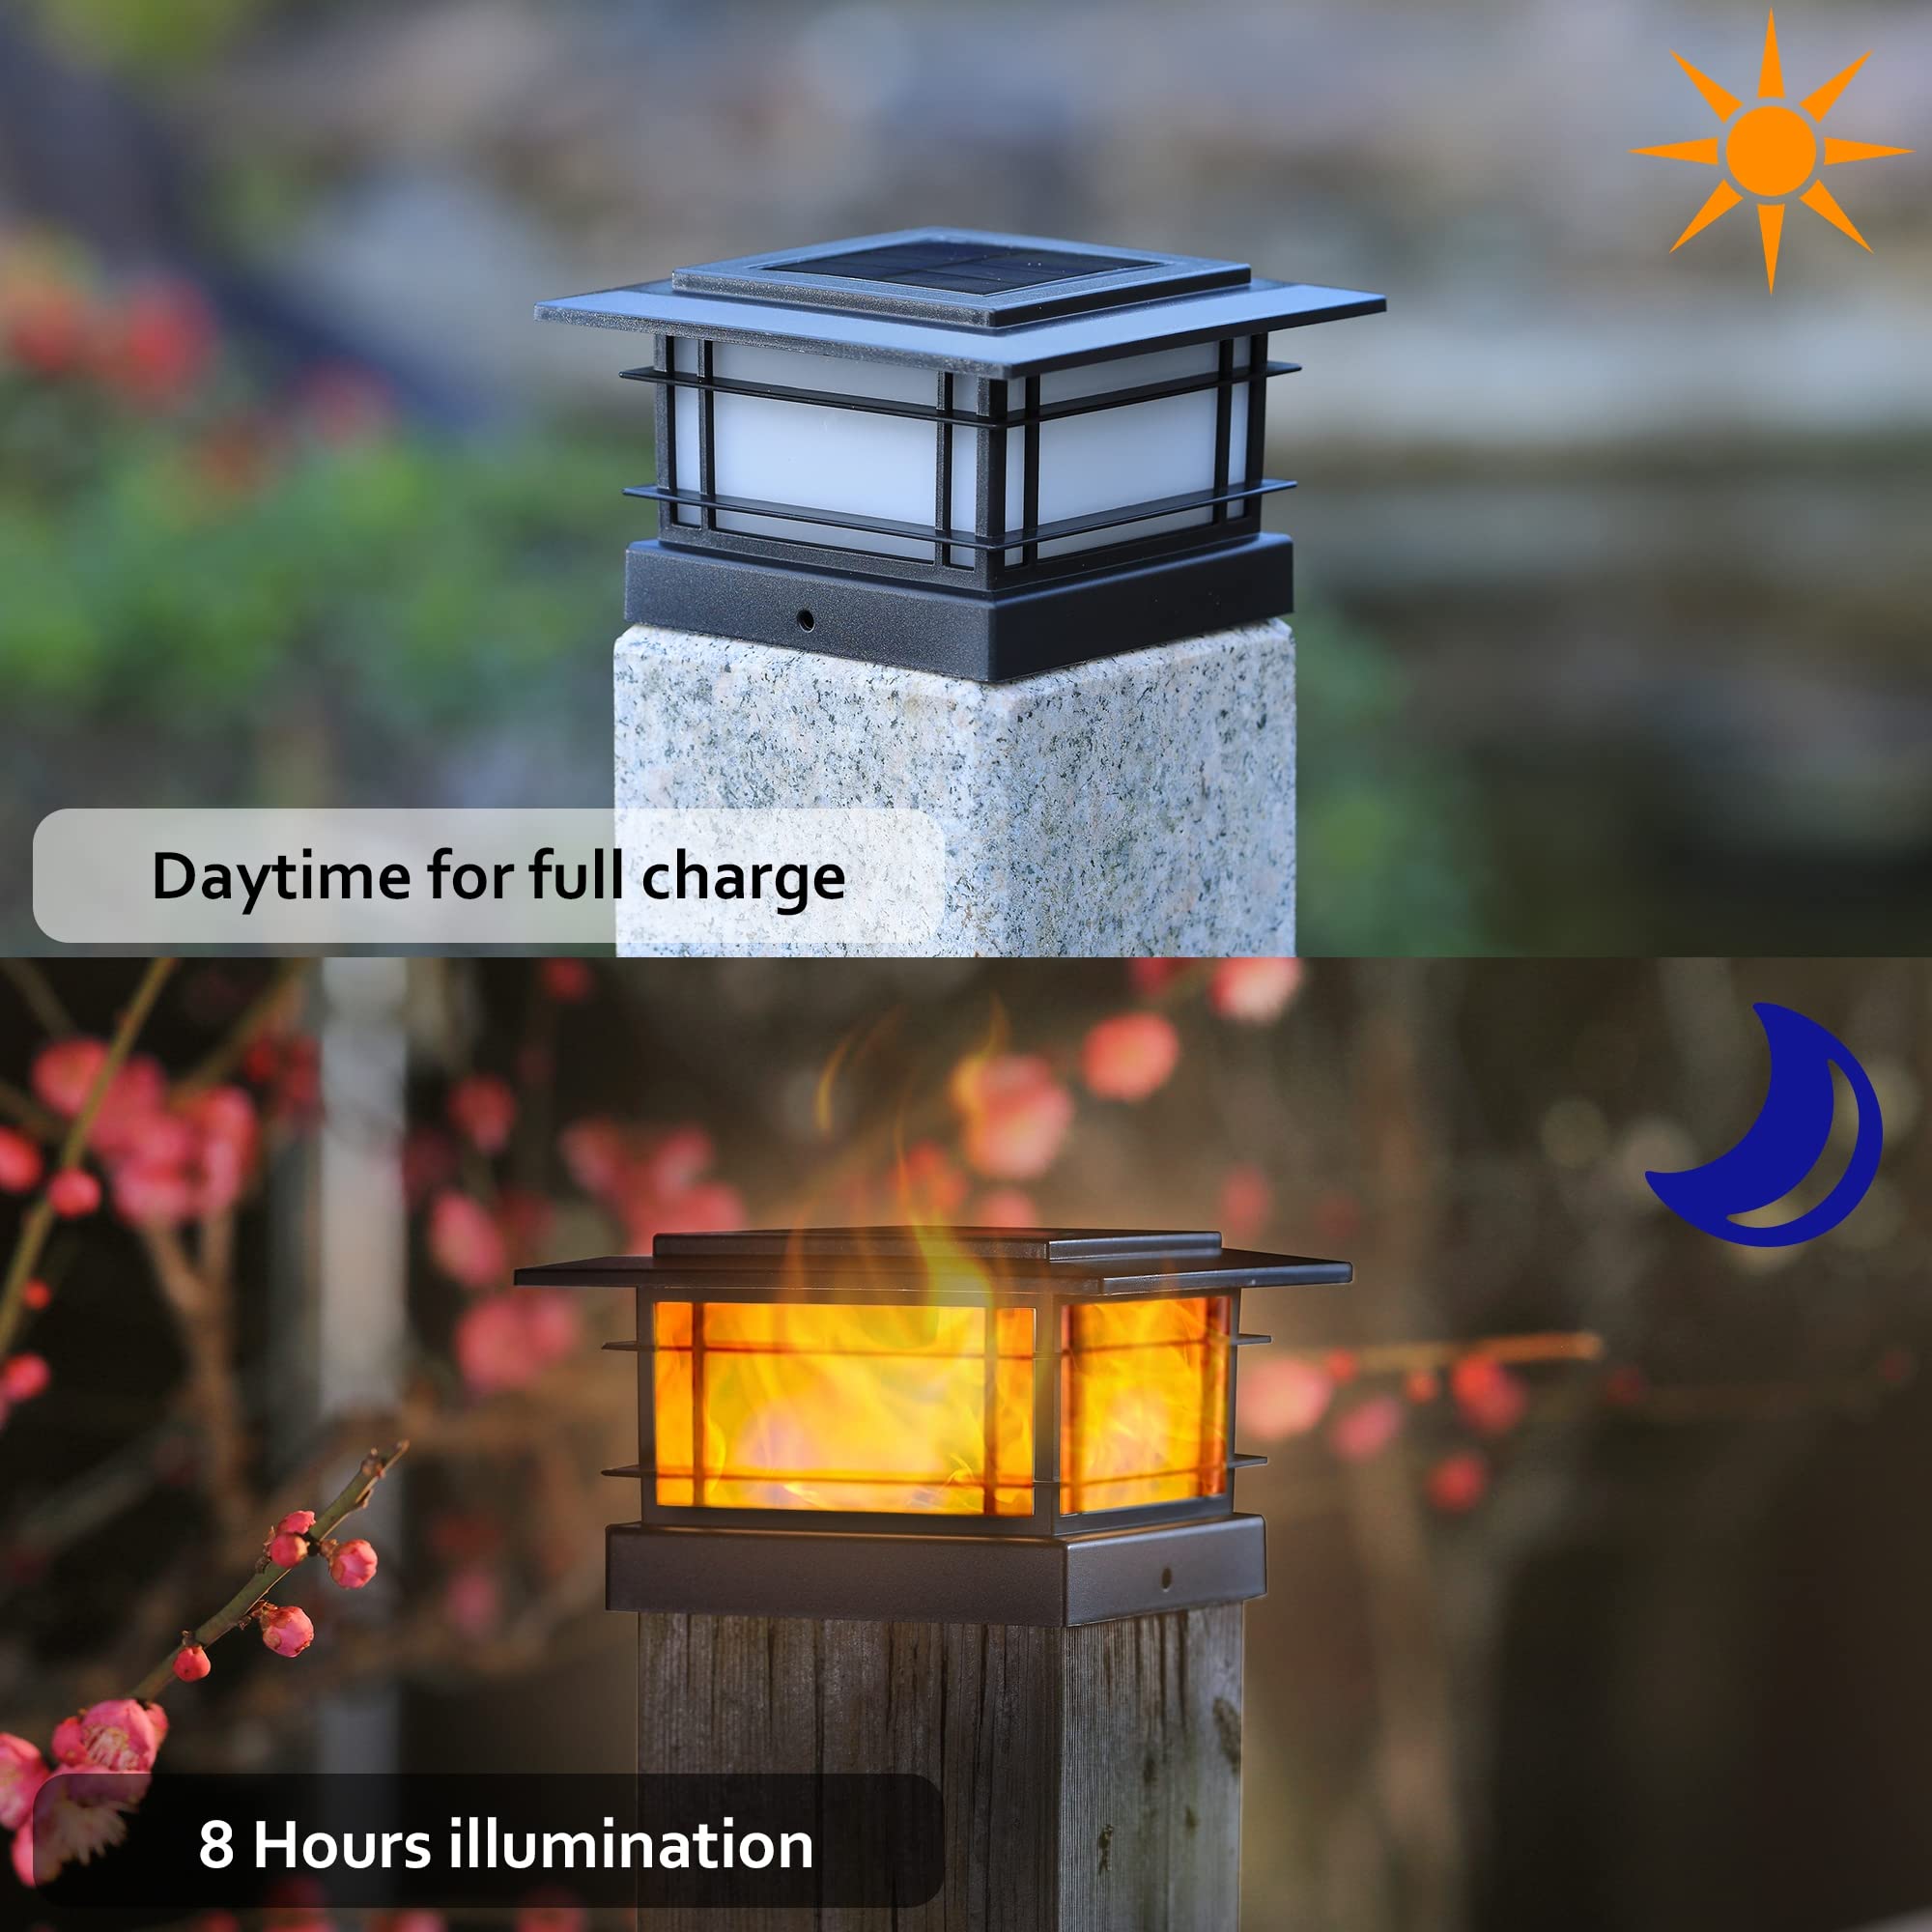 Dynaming 4 Pack Solar Flame Post Lights Outdoor, Solar Powered Fence Post Cap Lights, High Brightness Flickering Flame SMD LED Lighting Decor for Garden Deck Patio, 4x4, 5x5 or 6x6 Vinyl/Wooden Posts